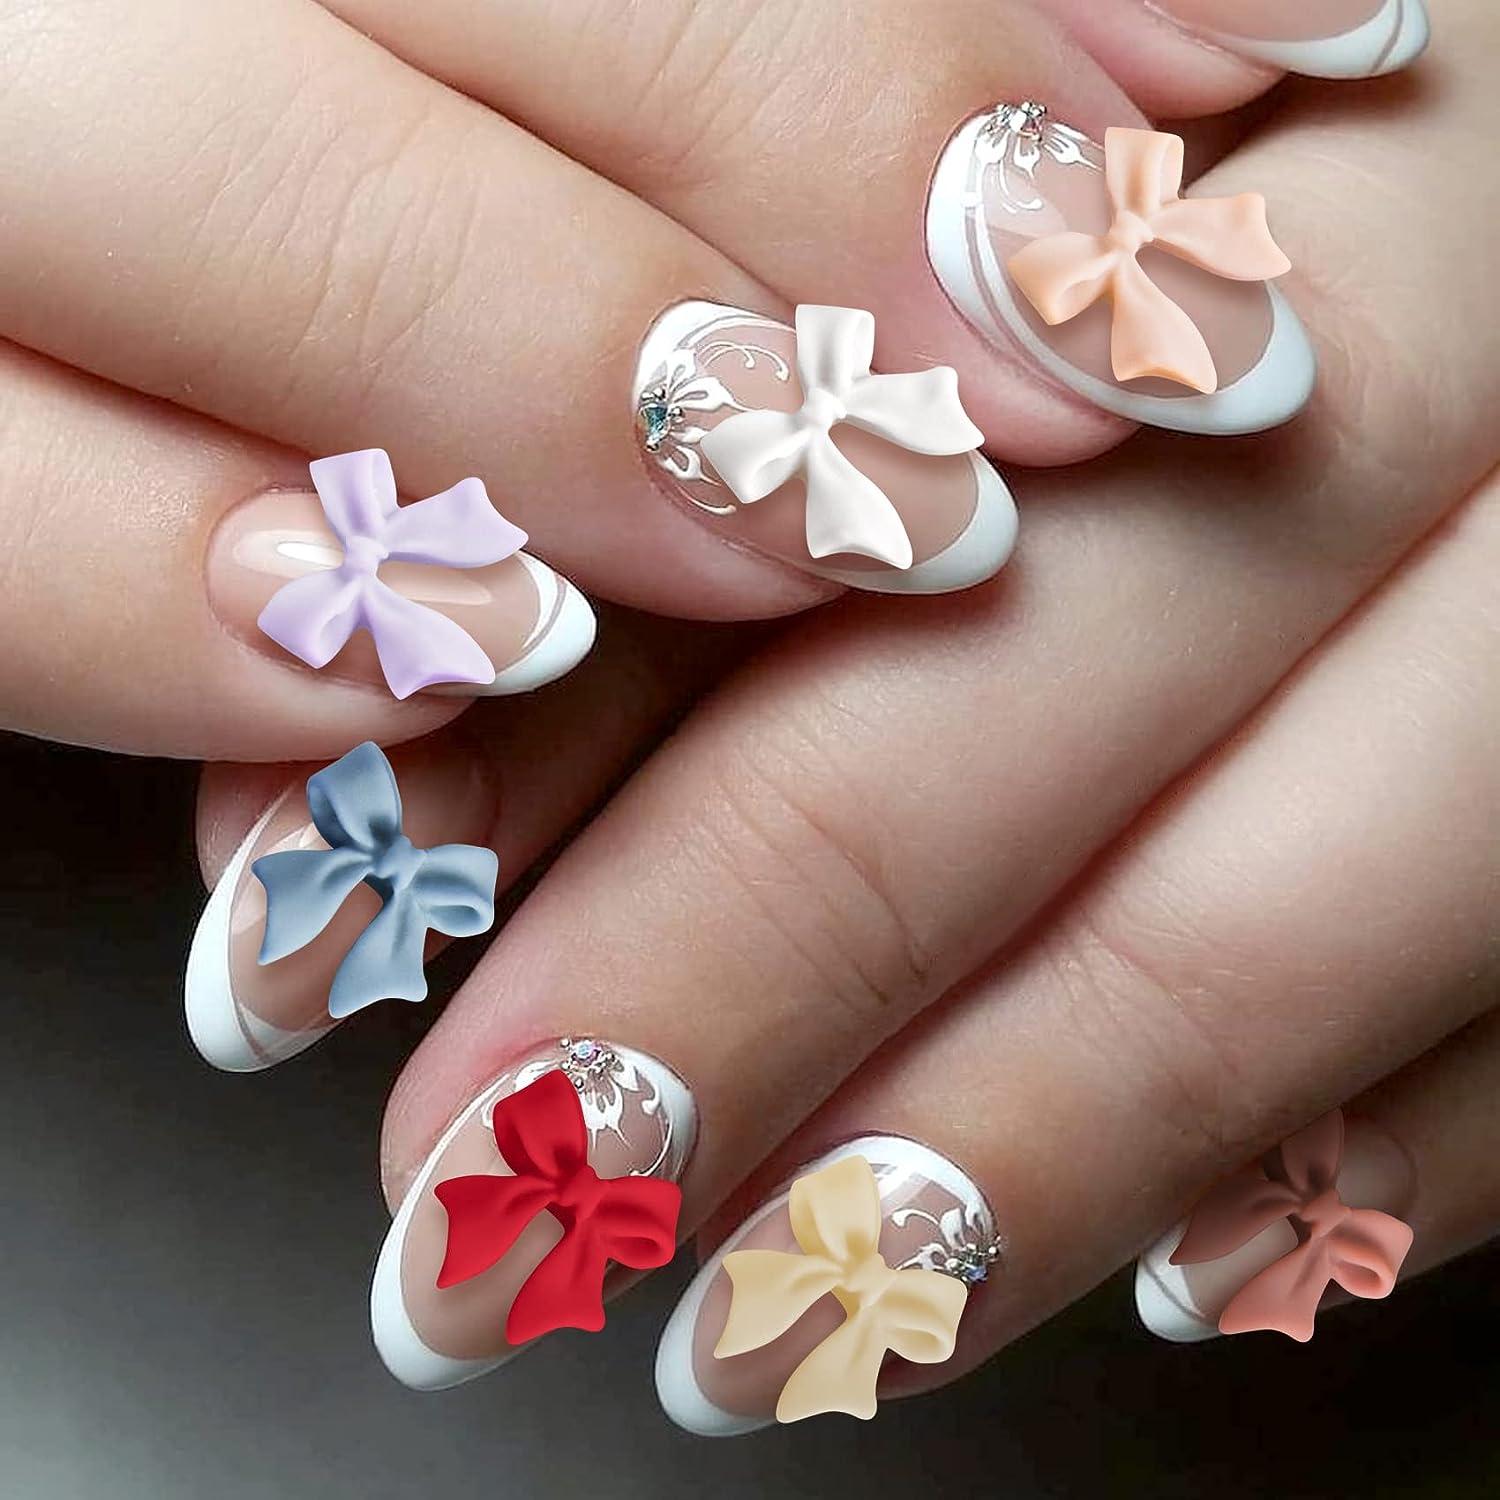 Buy D.B.Z. ® 3D Resin Bow Tie Nail Decoration, 3D Nail Charms Decals Resin  Crystal Stickers Accessories for Nail Art Design Online at Low Prices in  India - Amazon.in